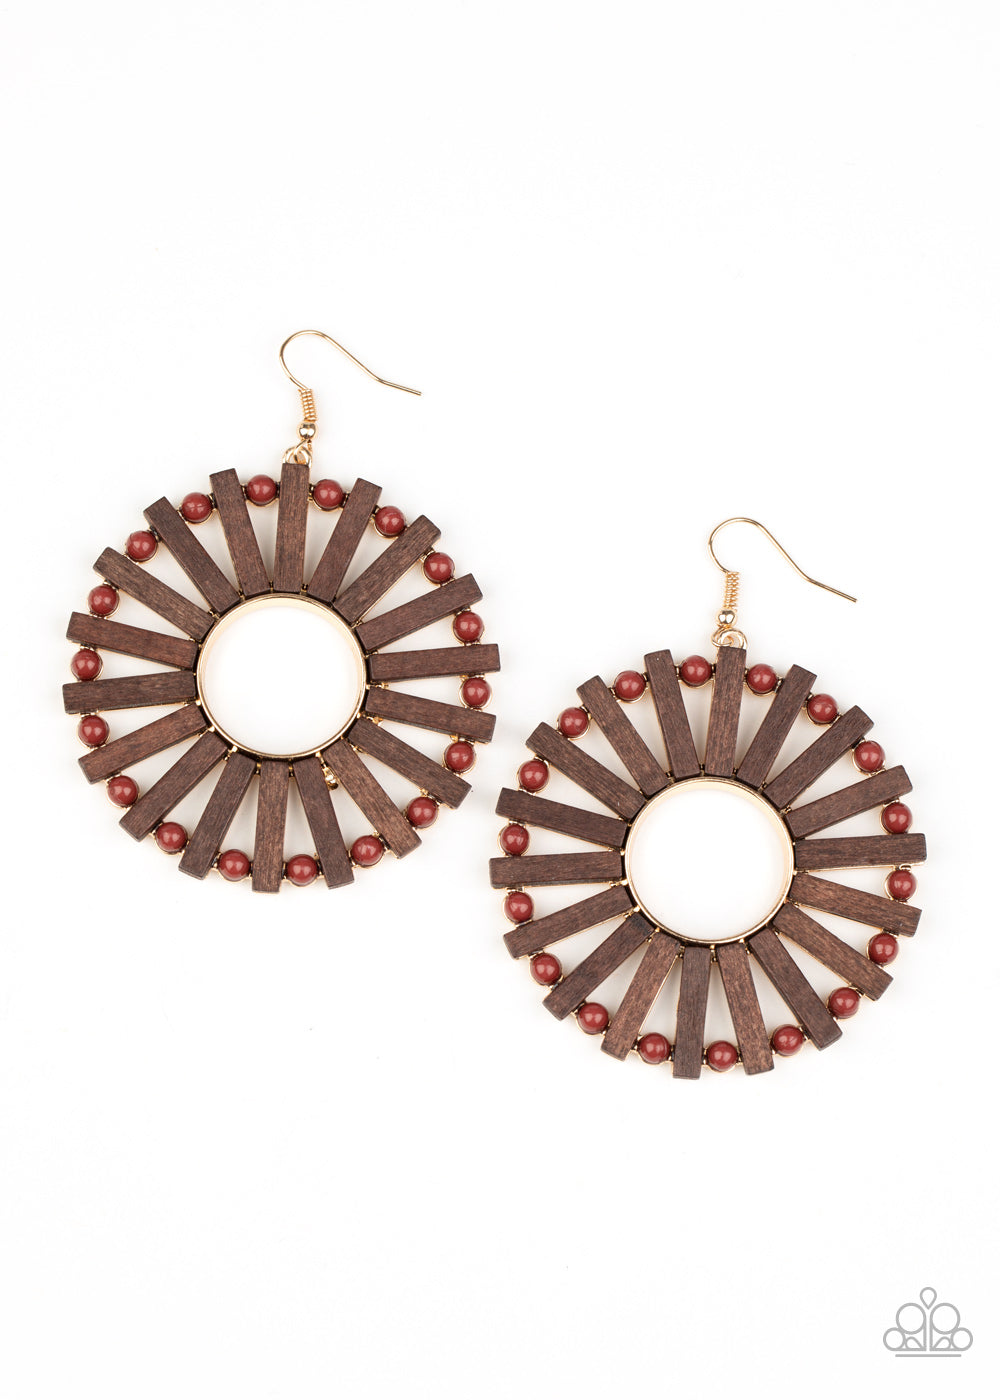 Solar Flare - Gold & Brown Wood Earrings - Princess Glam Shop